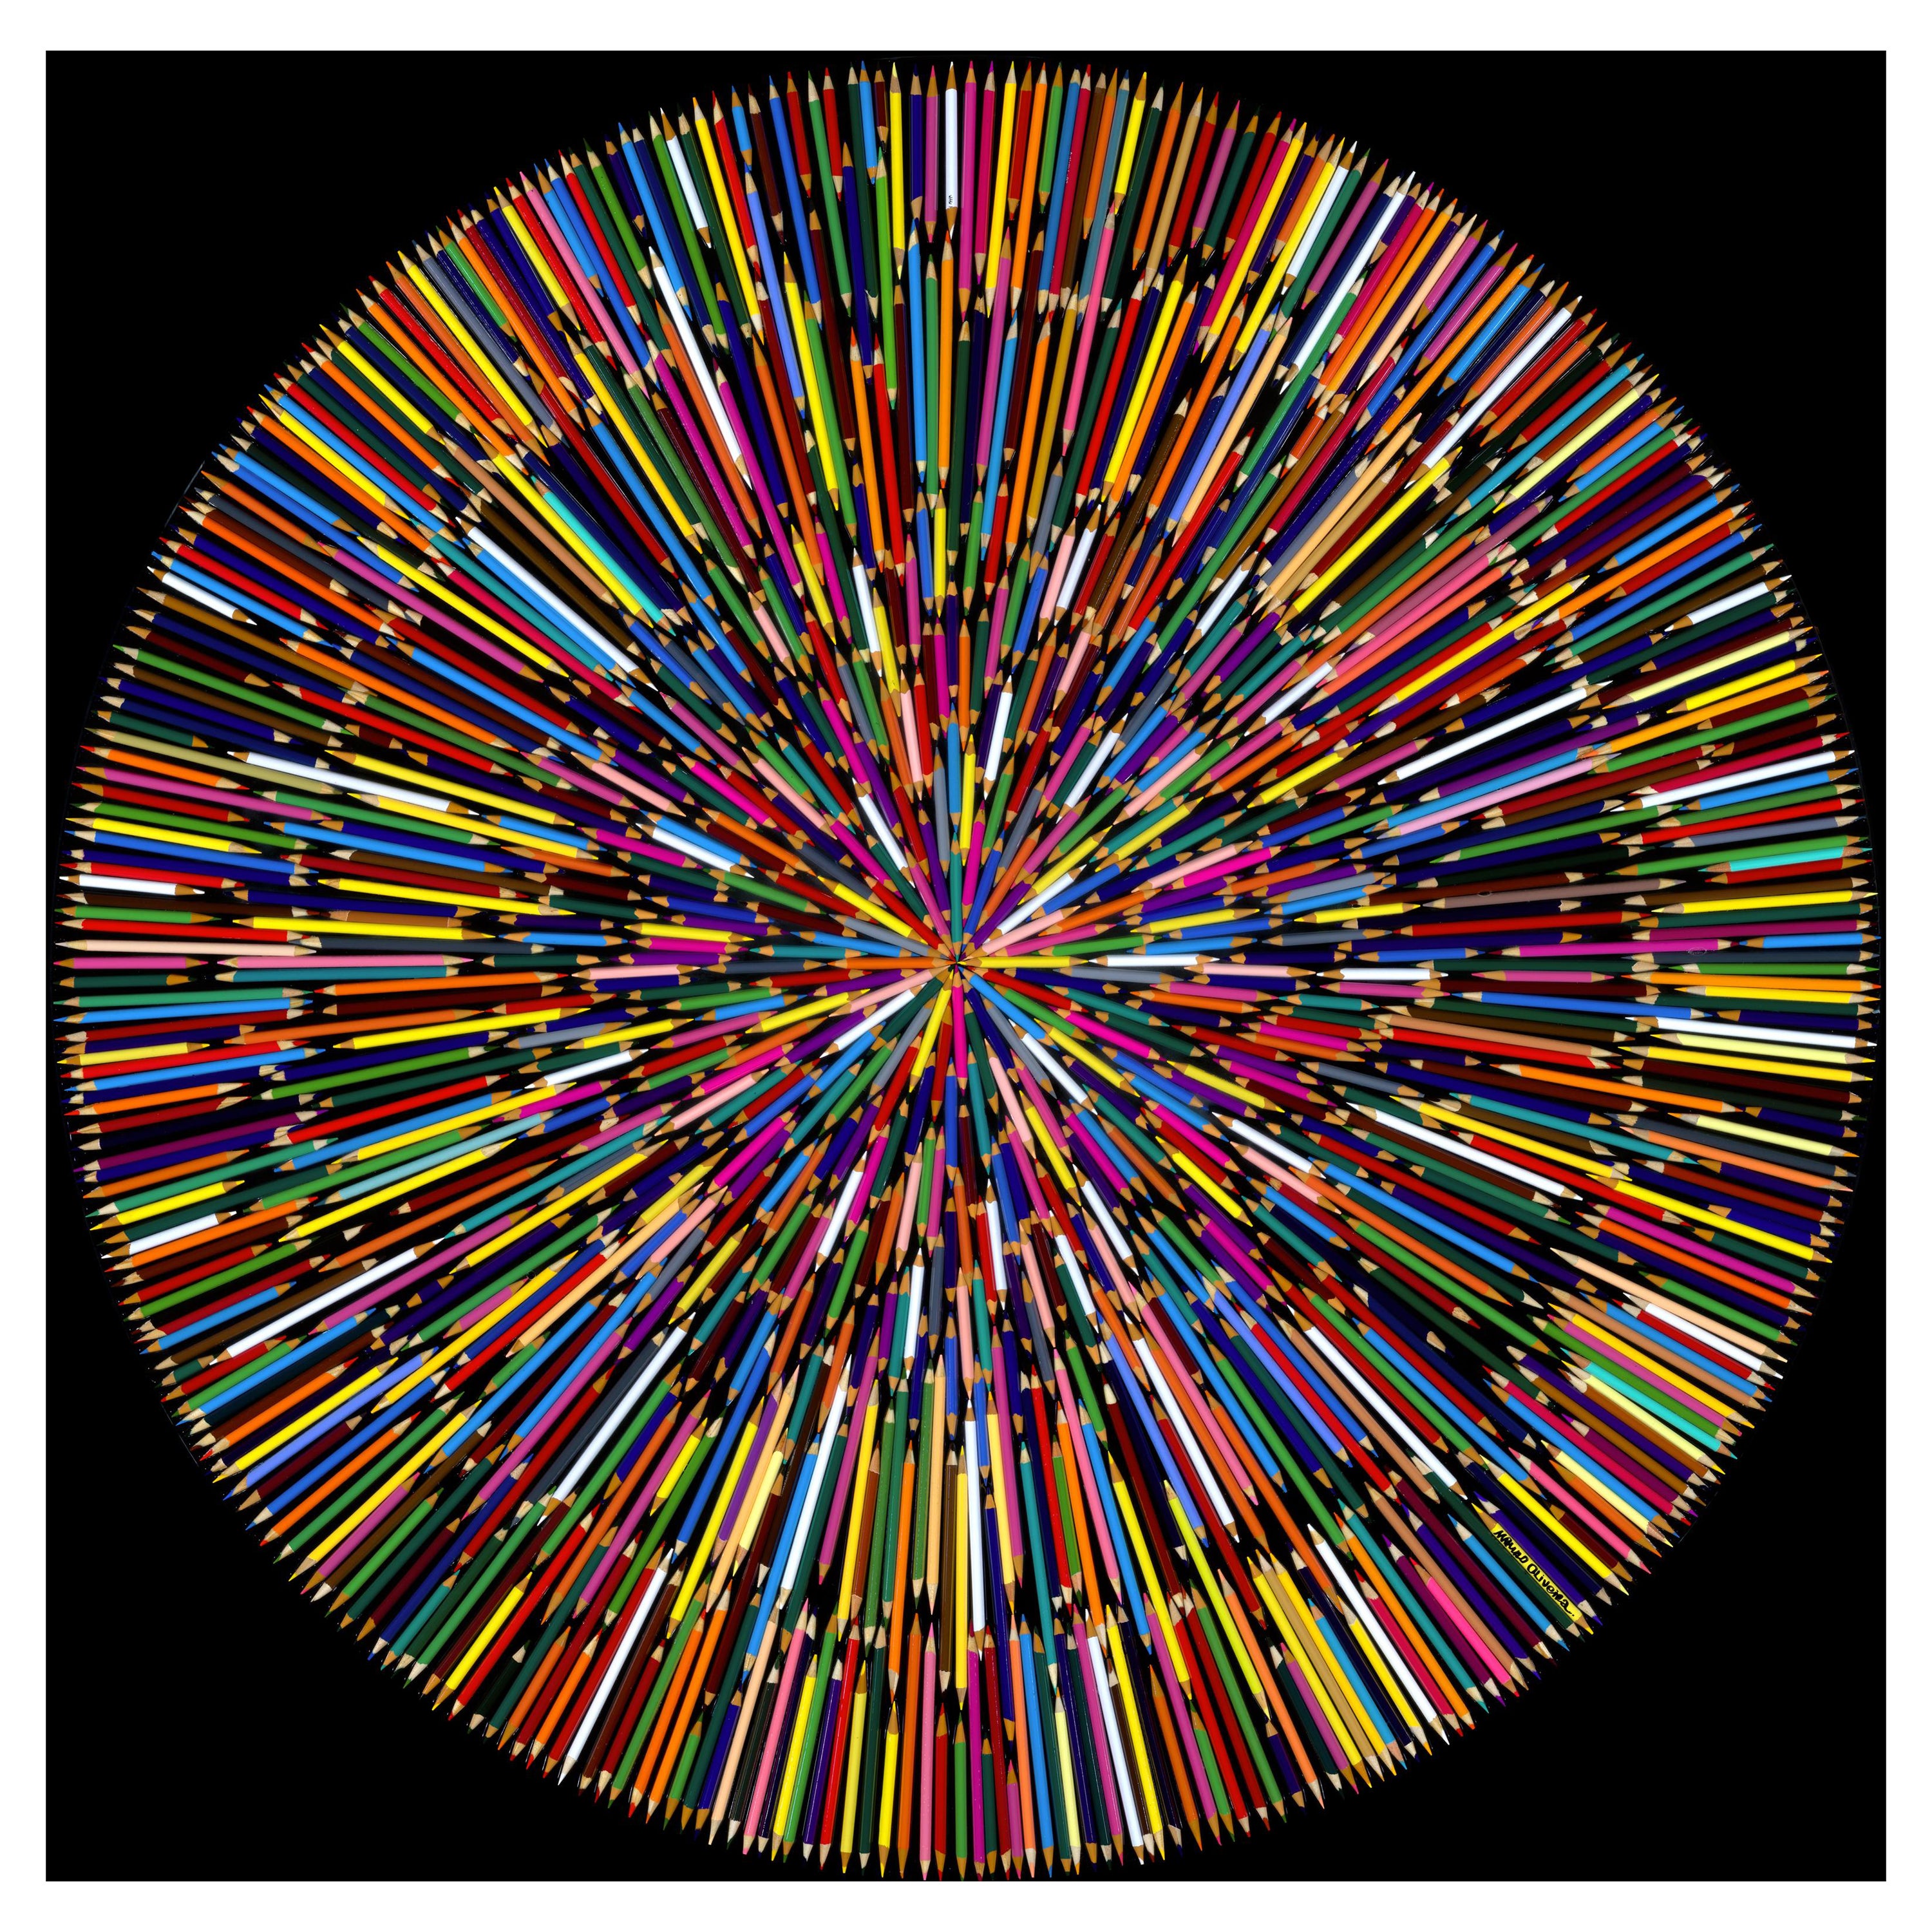 Mauro Oliveira Abstract Print - Colorful RainBow Epicenter II (Limited Edition of 30 Prints - BLACK BACKGROUND)